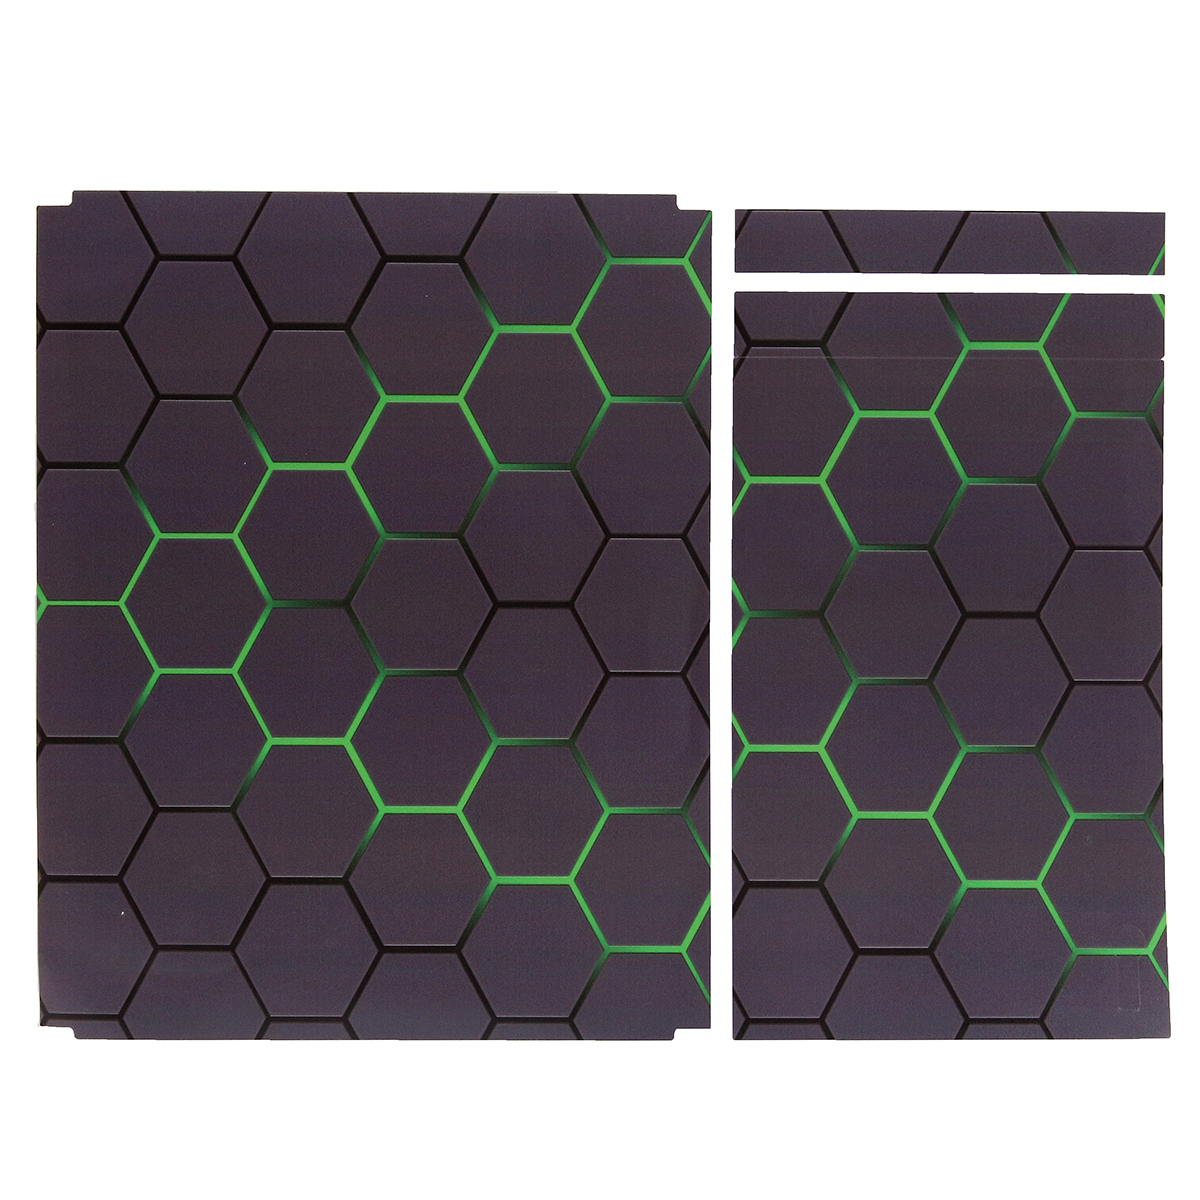 Green Grid Vinyl Decal Skin Stickers Cover for Xbox One S Game Console&2 Controllers 36